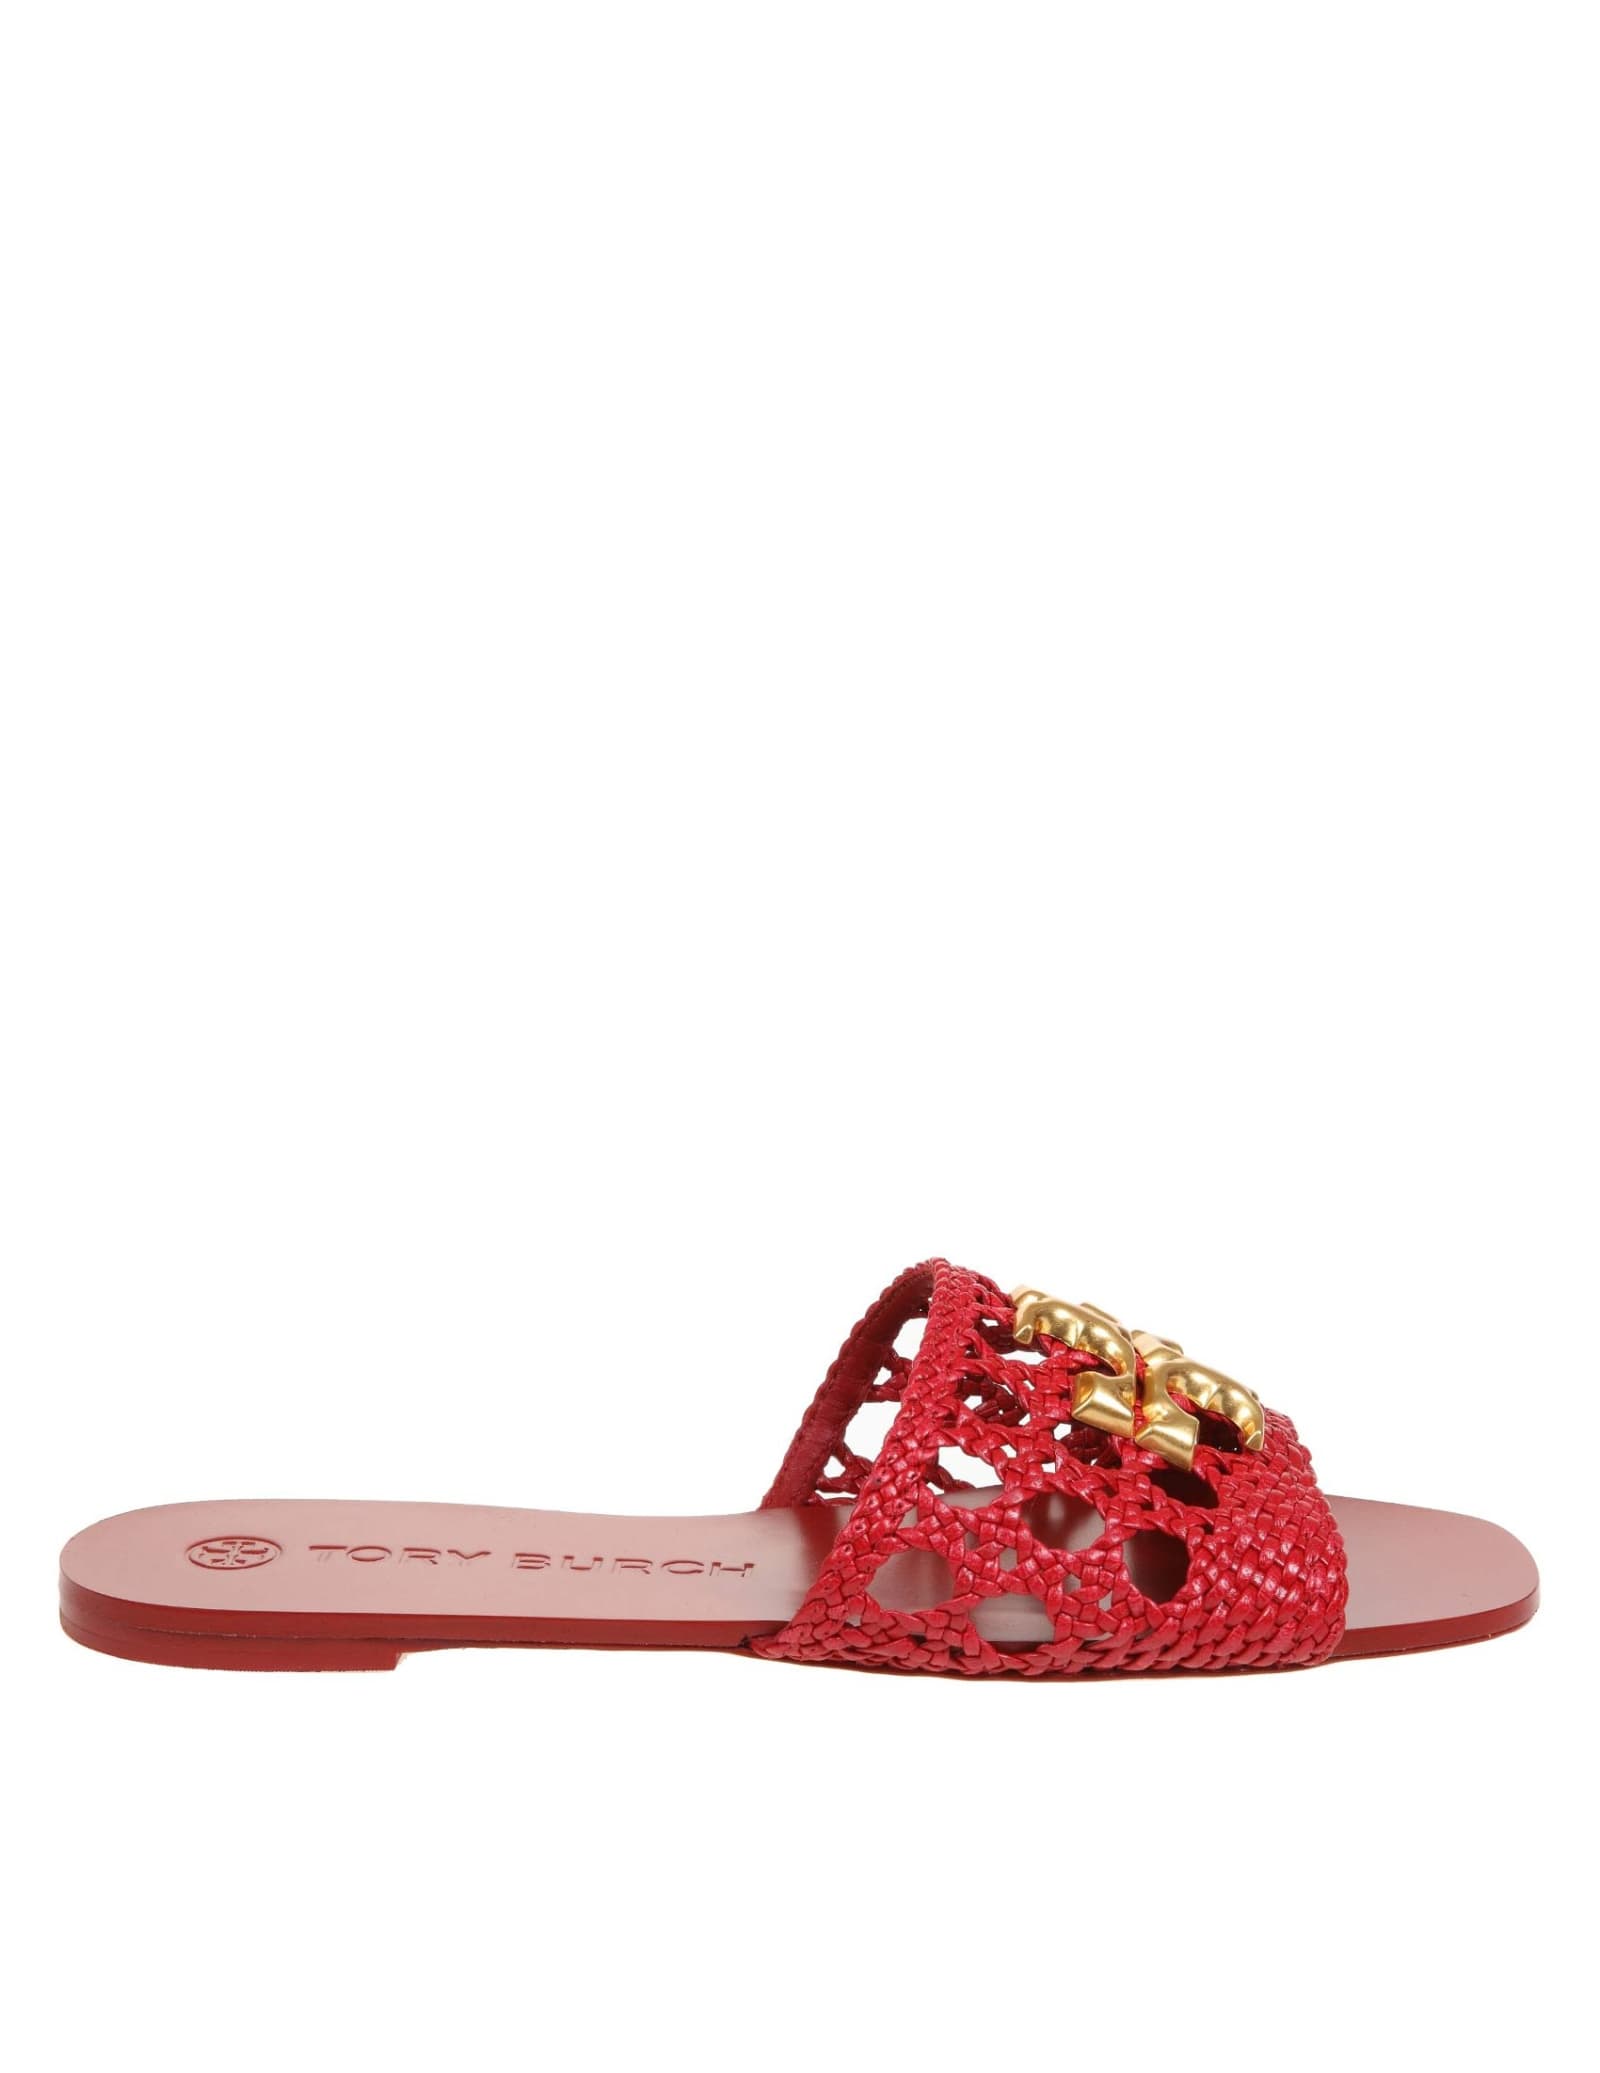 Photo of  Tory Burch Mules Eleanor In Red Woven Leather- shop Tory Burch  online sales